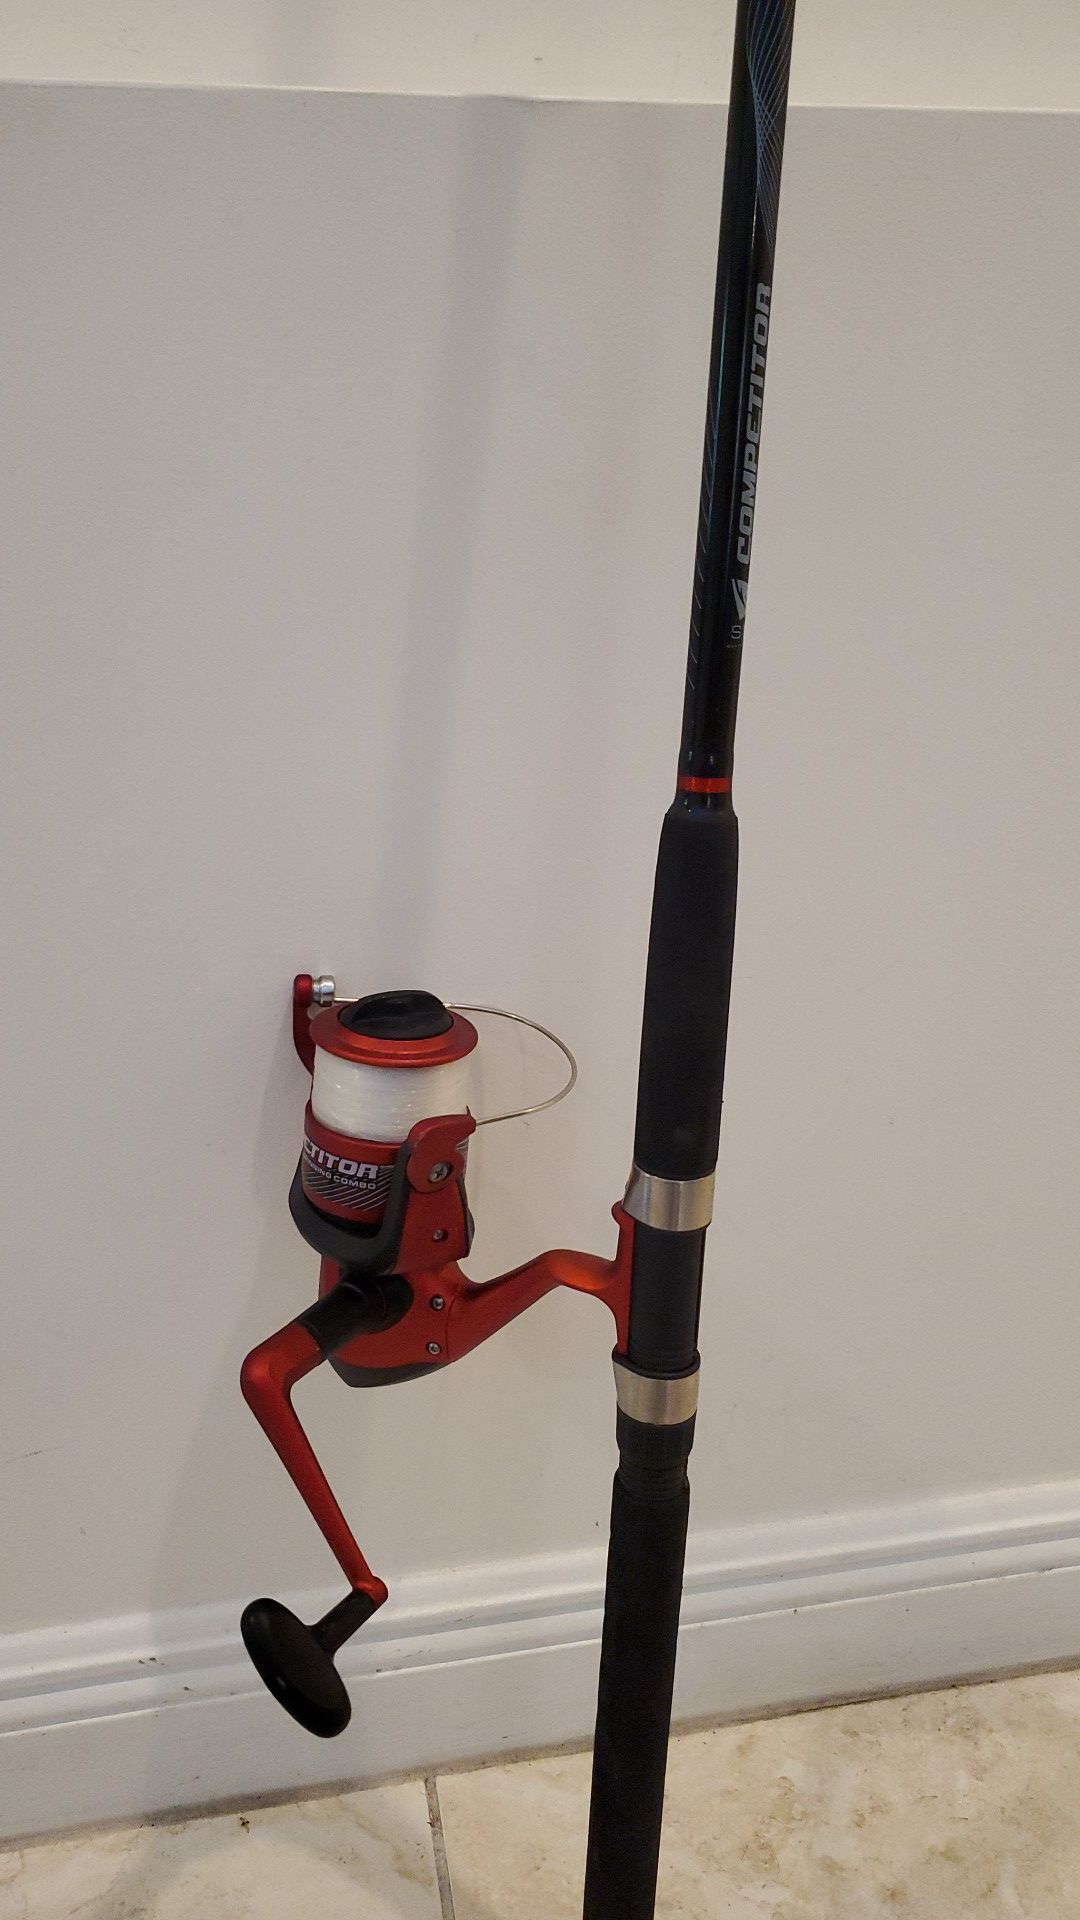 Southbend Competitor rod and reel combo 8 foot fishing pole